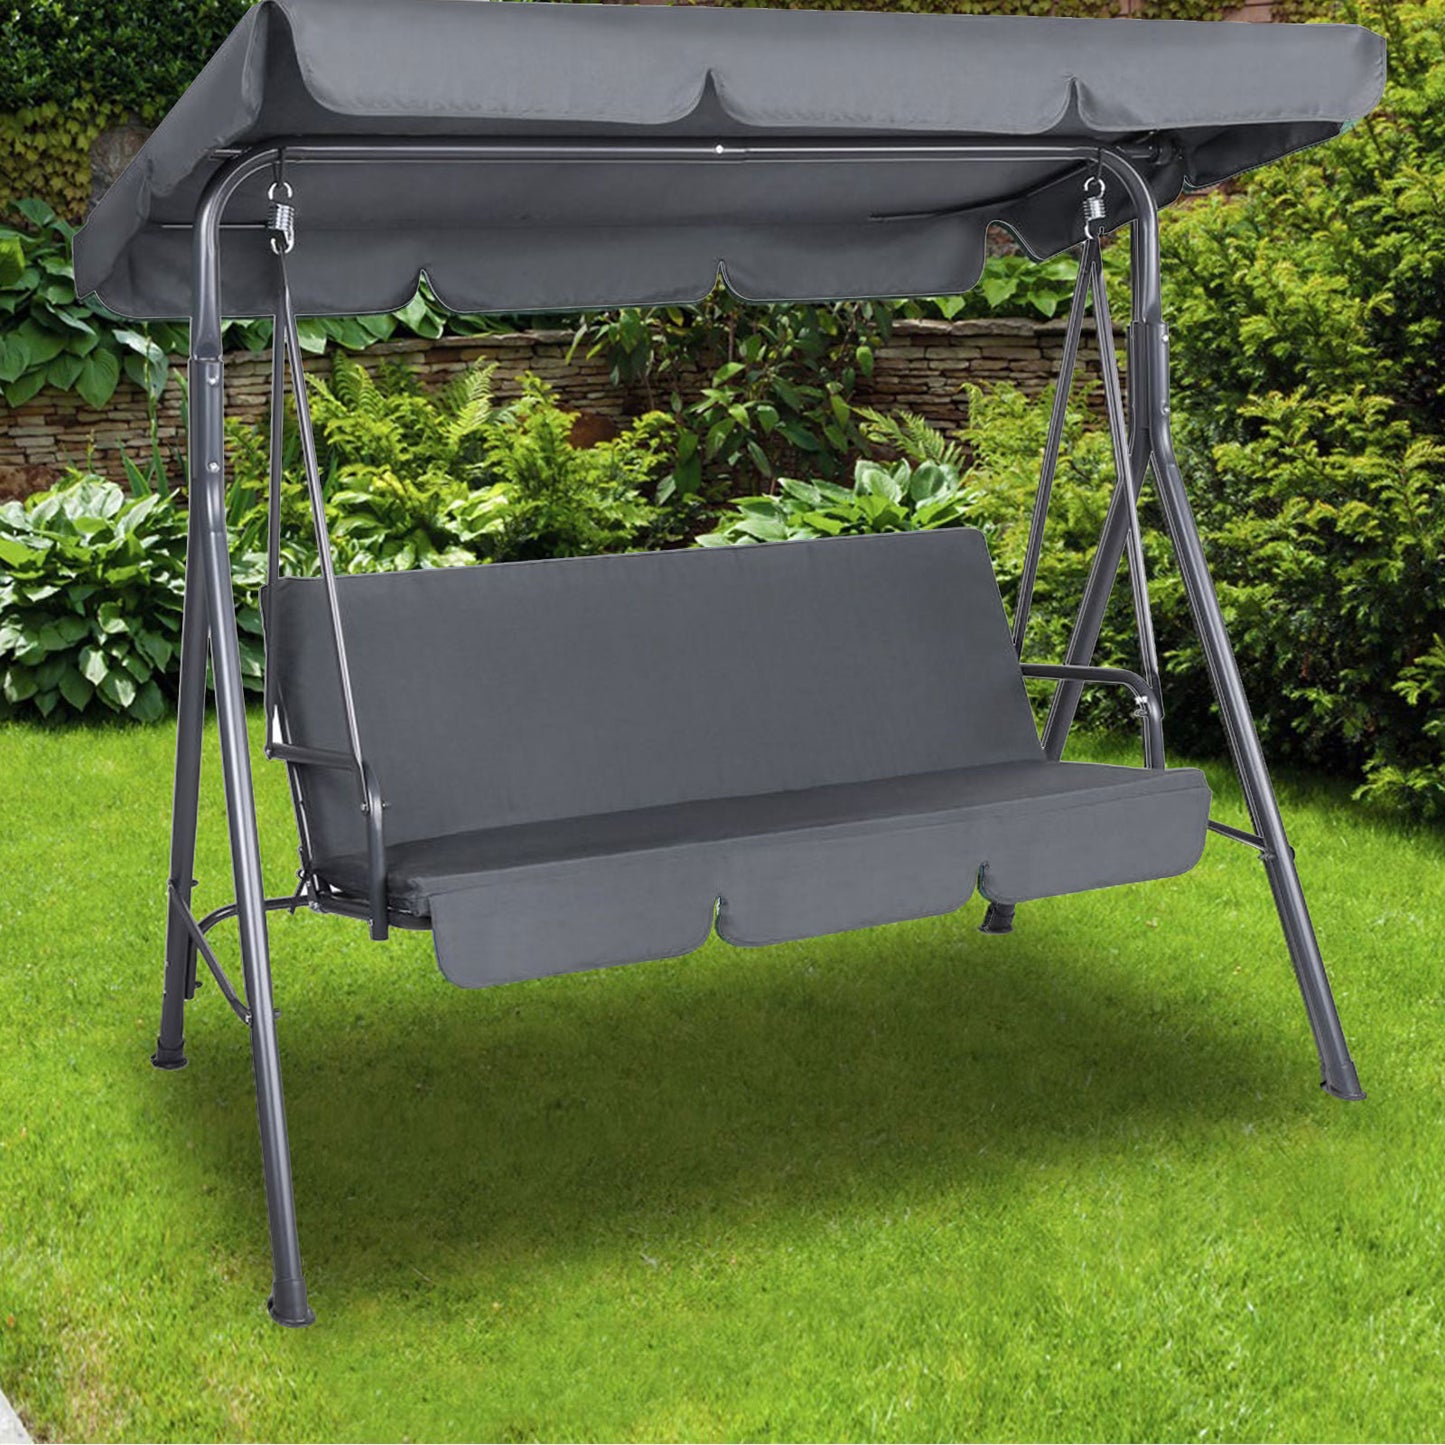 Milano Outdoor Swing Bench Seat Chair Canopy Furniture 3 Seater Garden Hammock - Grey - image3